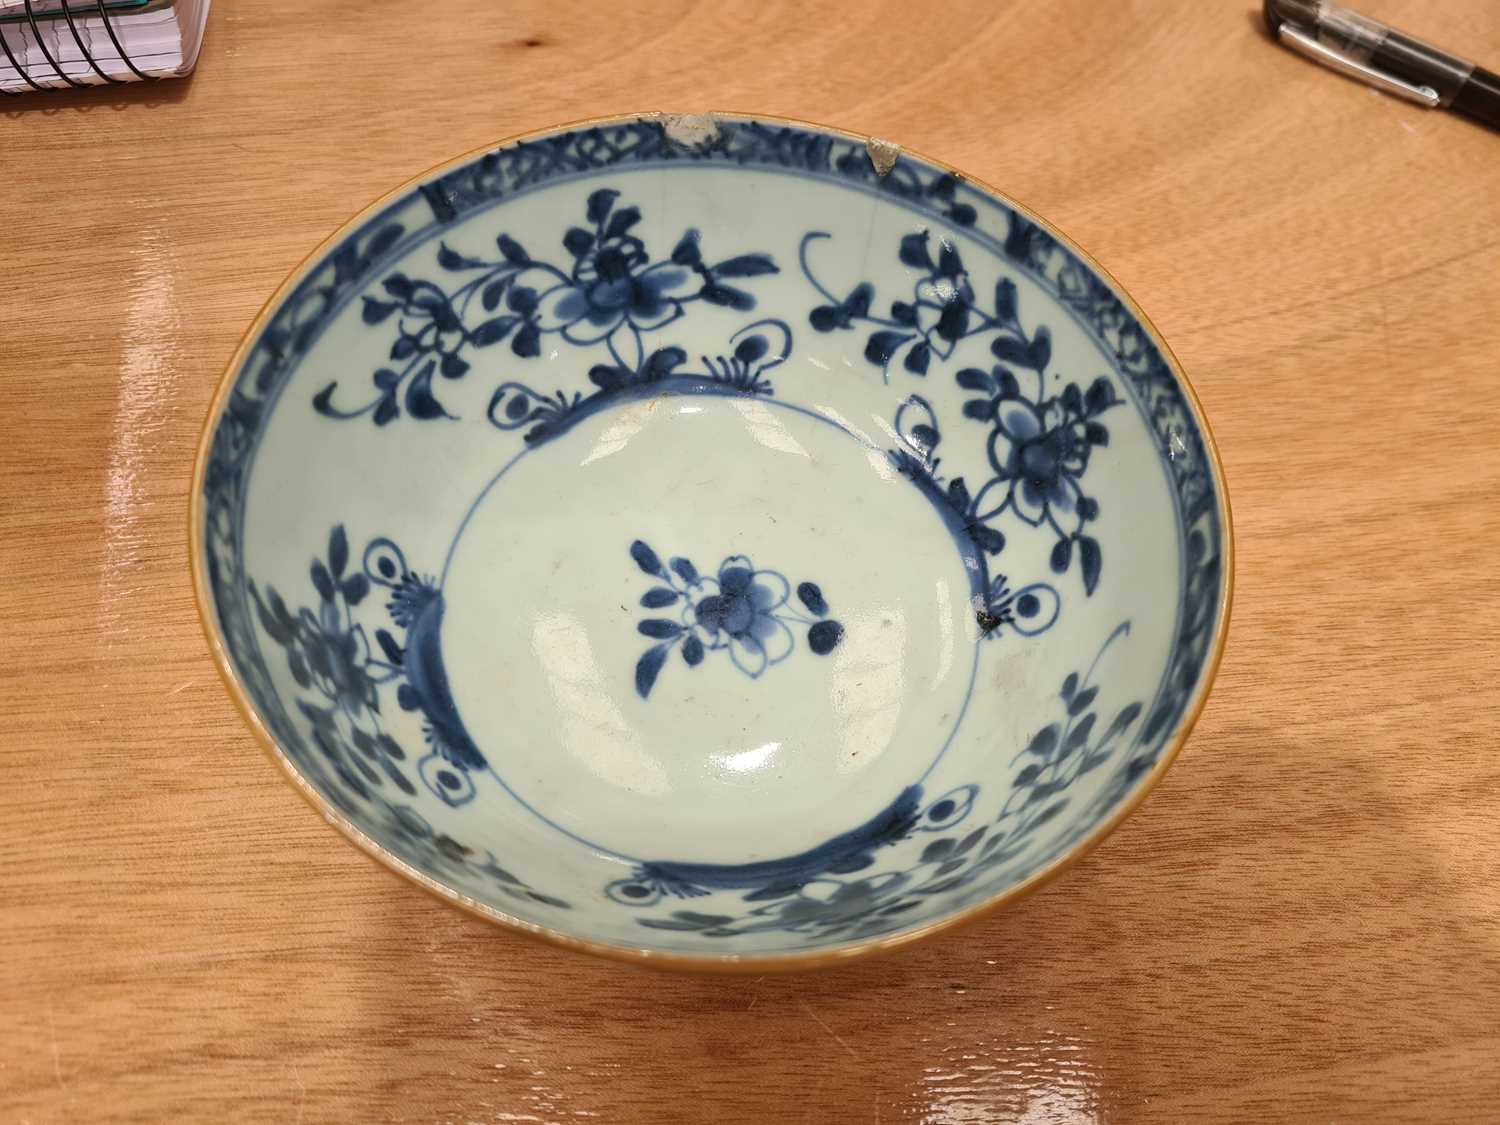 An assortment of Chinese porcelain, Ming - Qing dynasty, to include a Swatow bowl from the Bi - Image 16 of 53